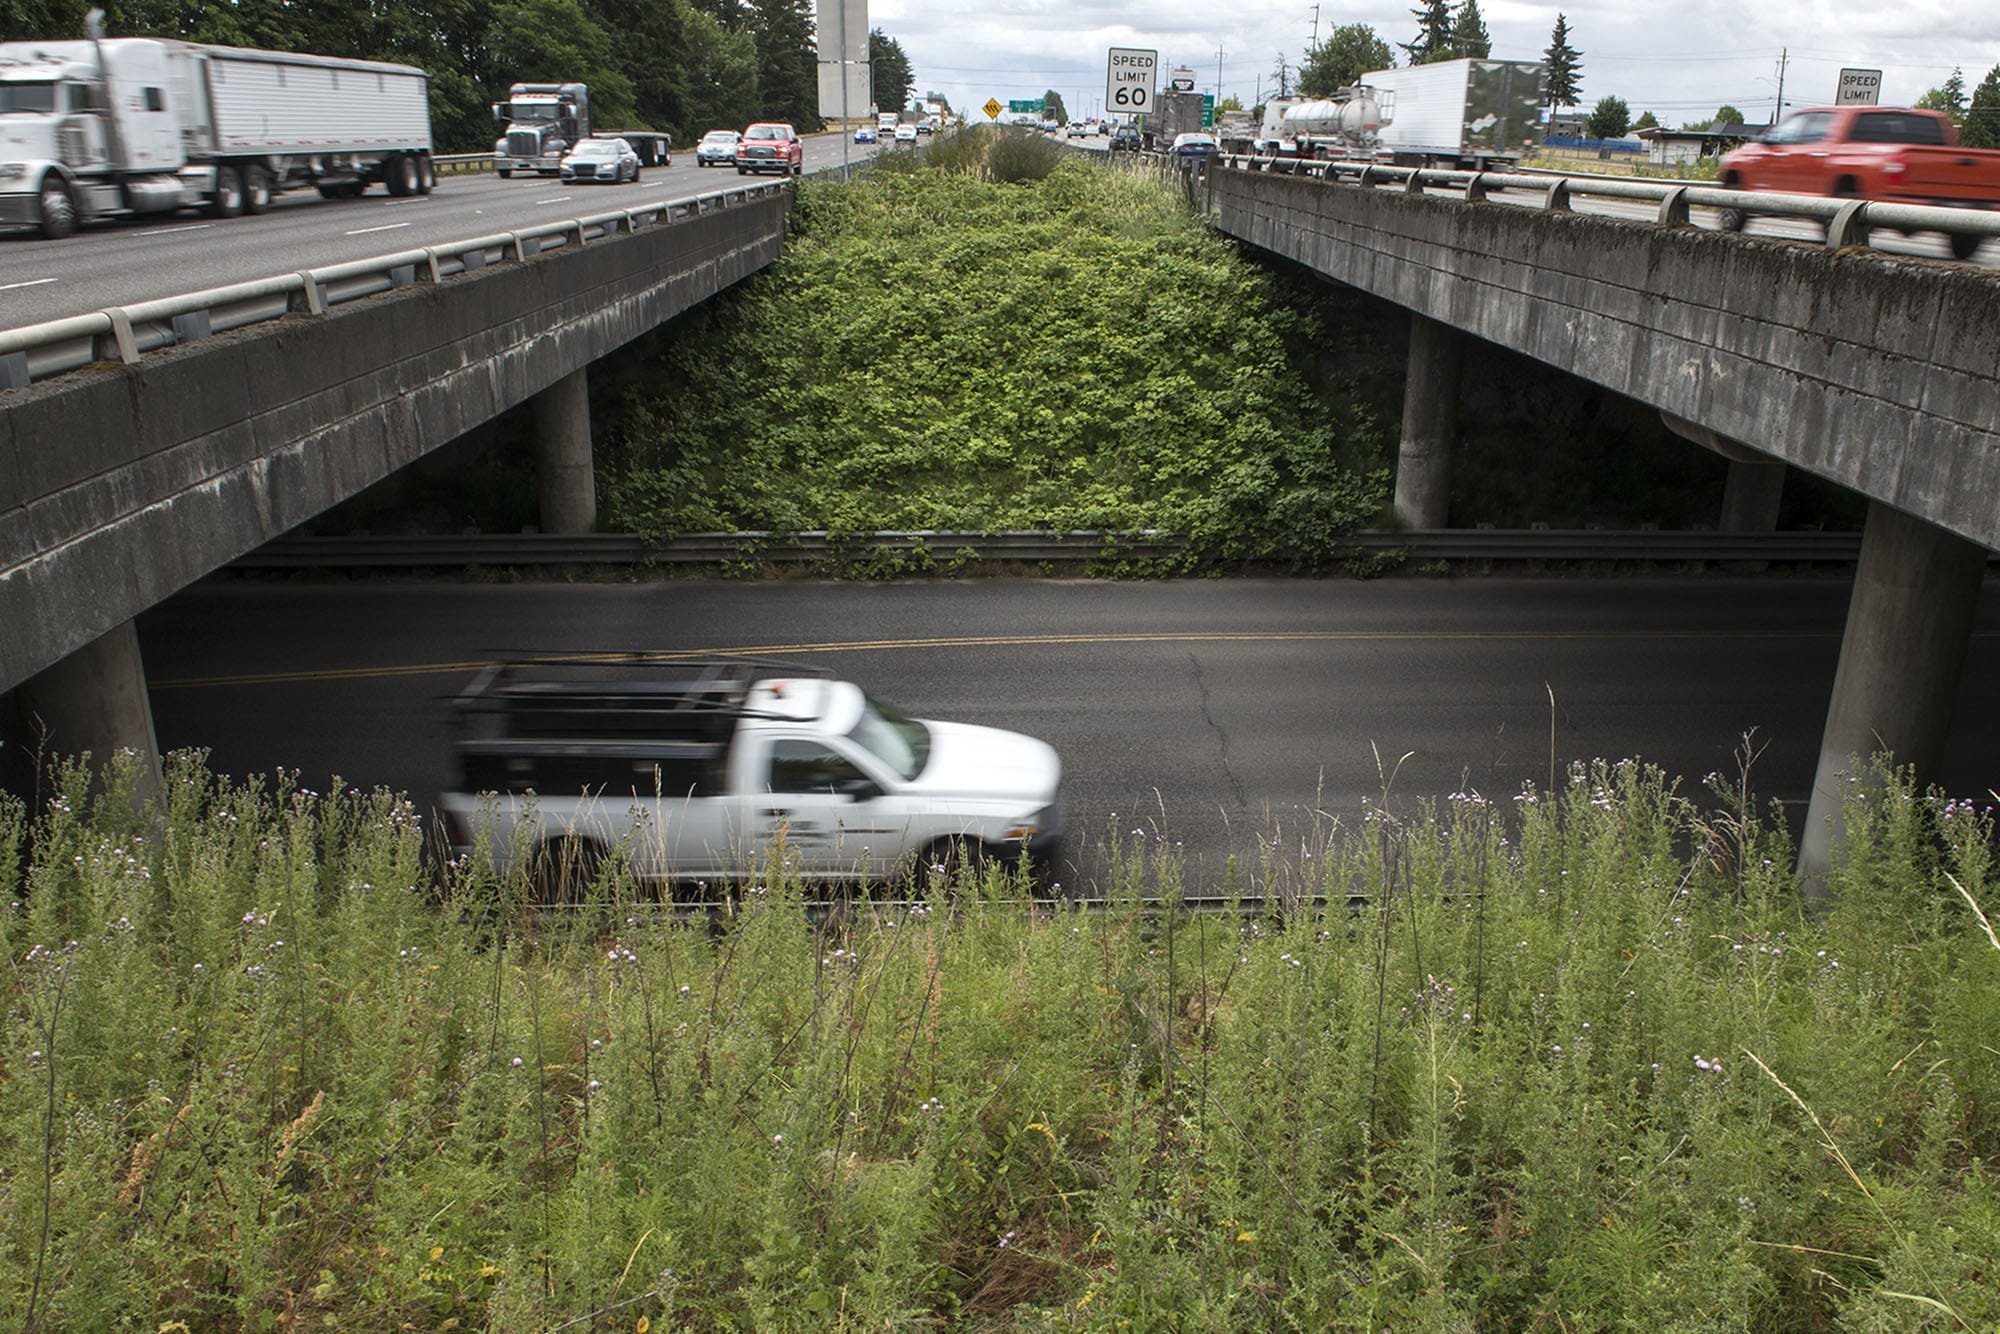 Traffic drives past the 179th Street and I-5 interchange.